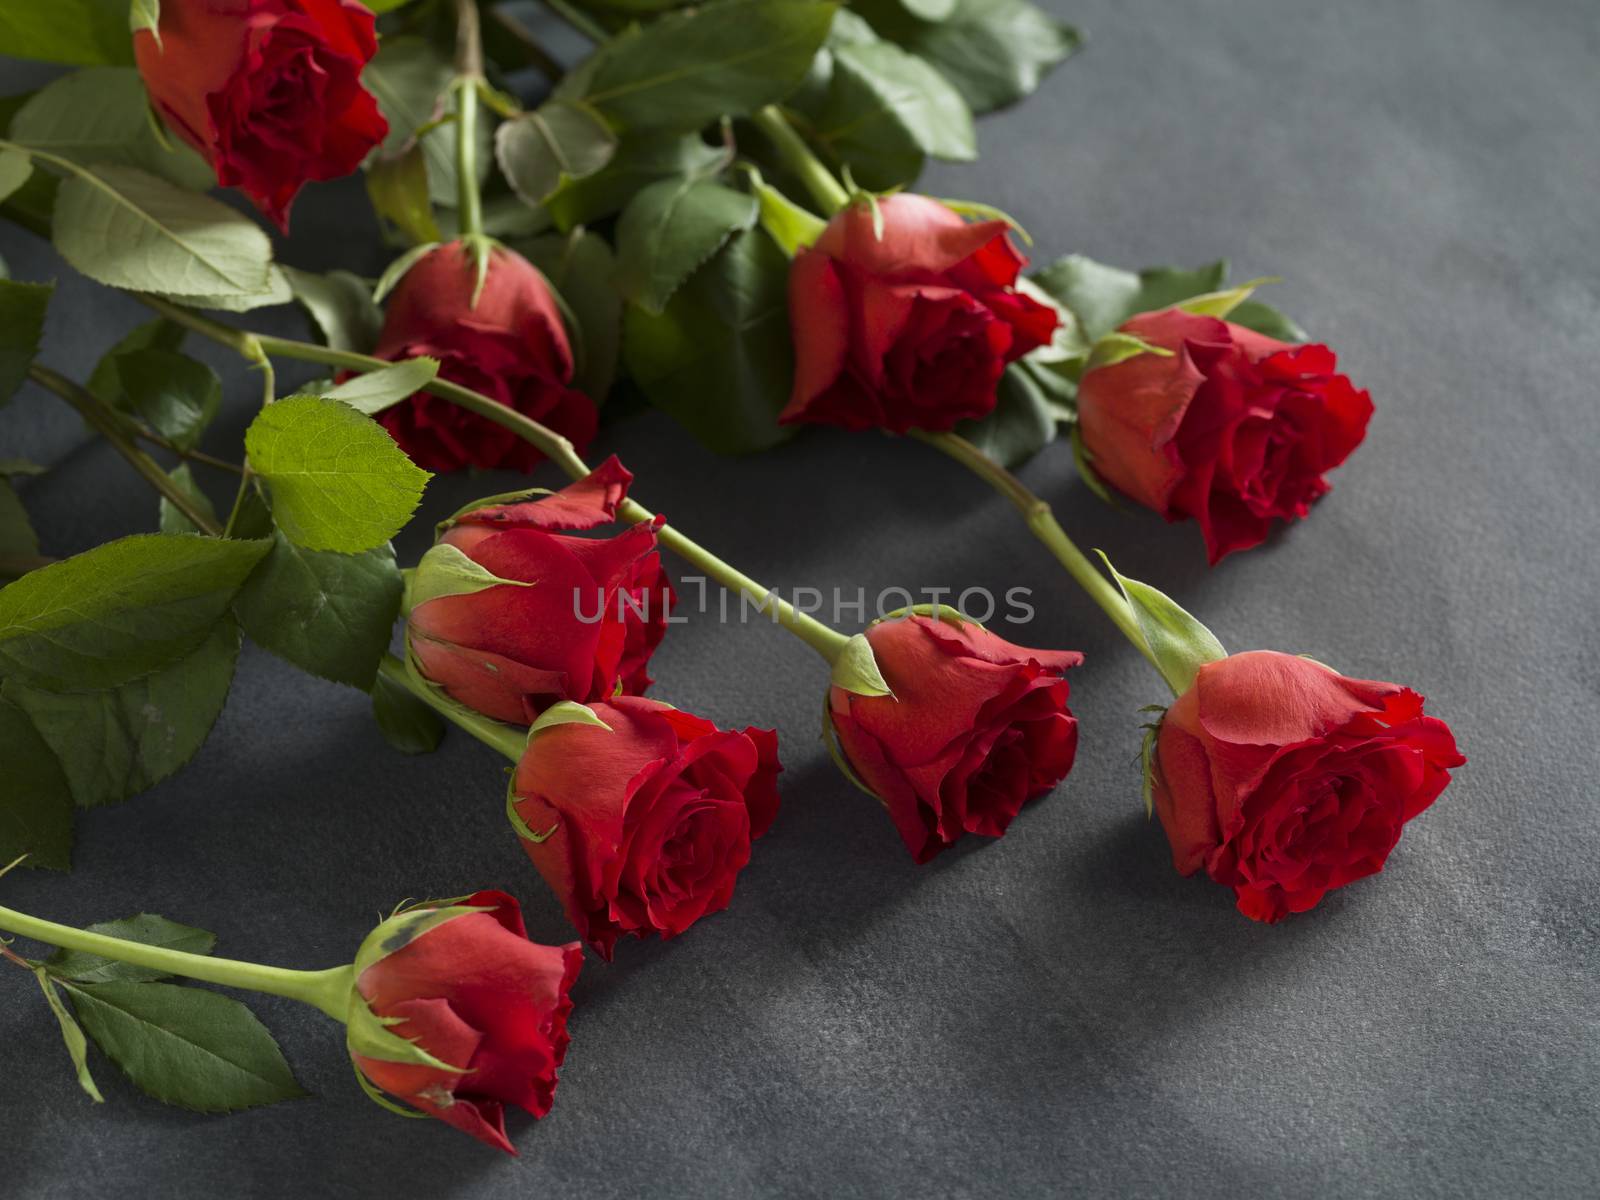 Beautiful bunch of roses on a grey background by janssenkruseproductions